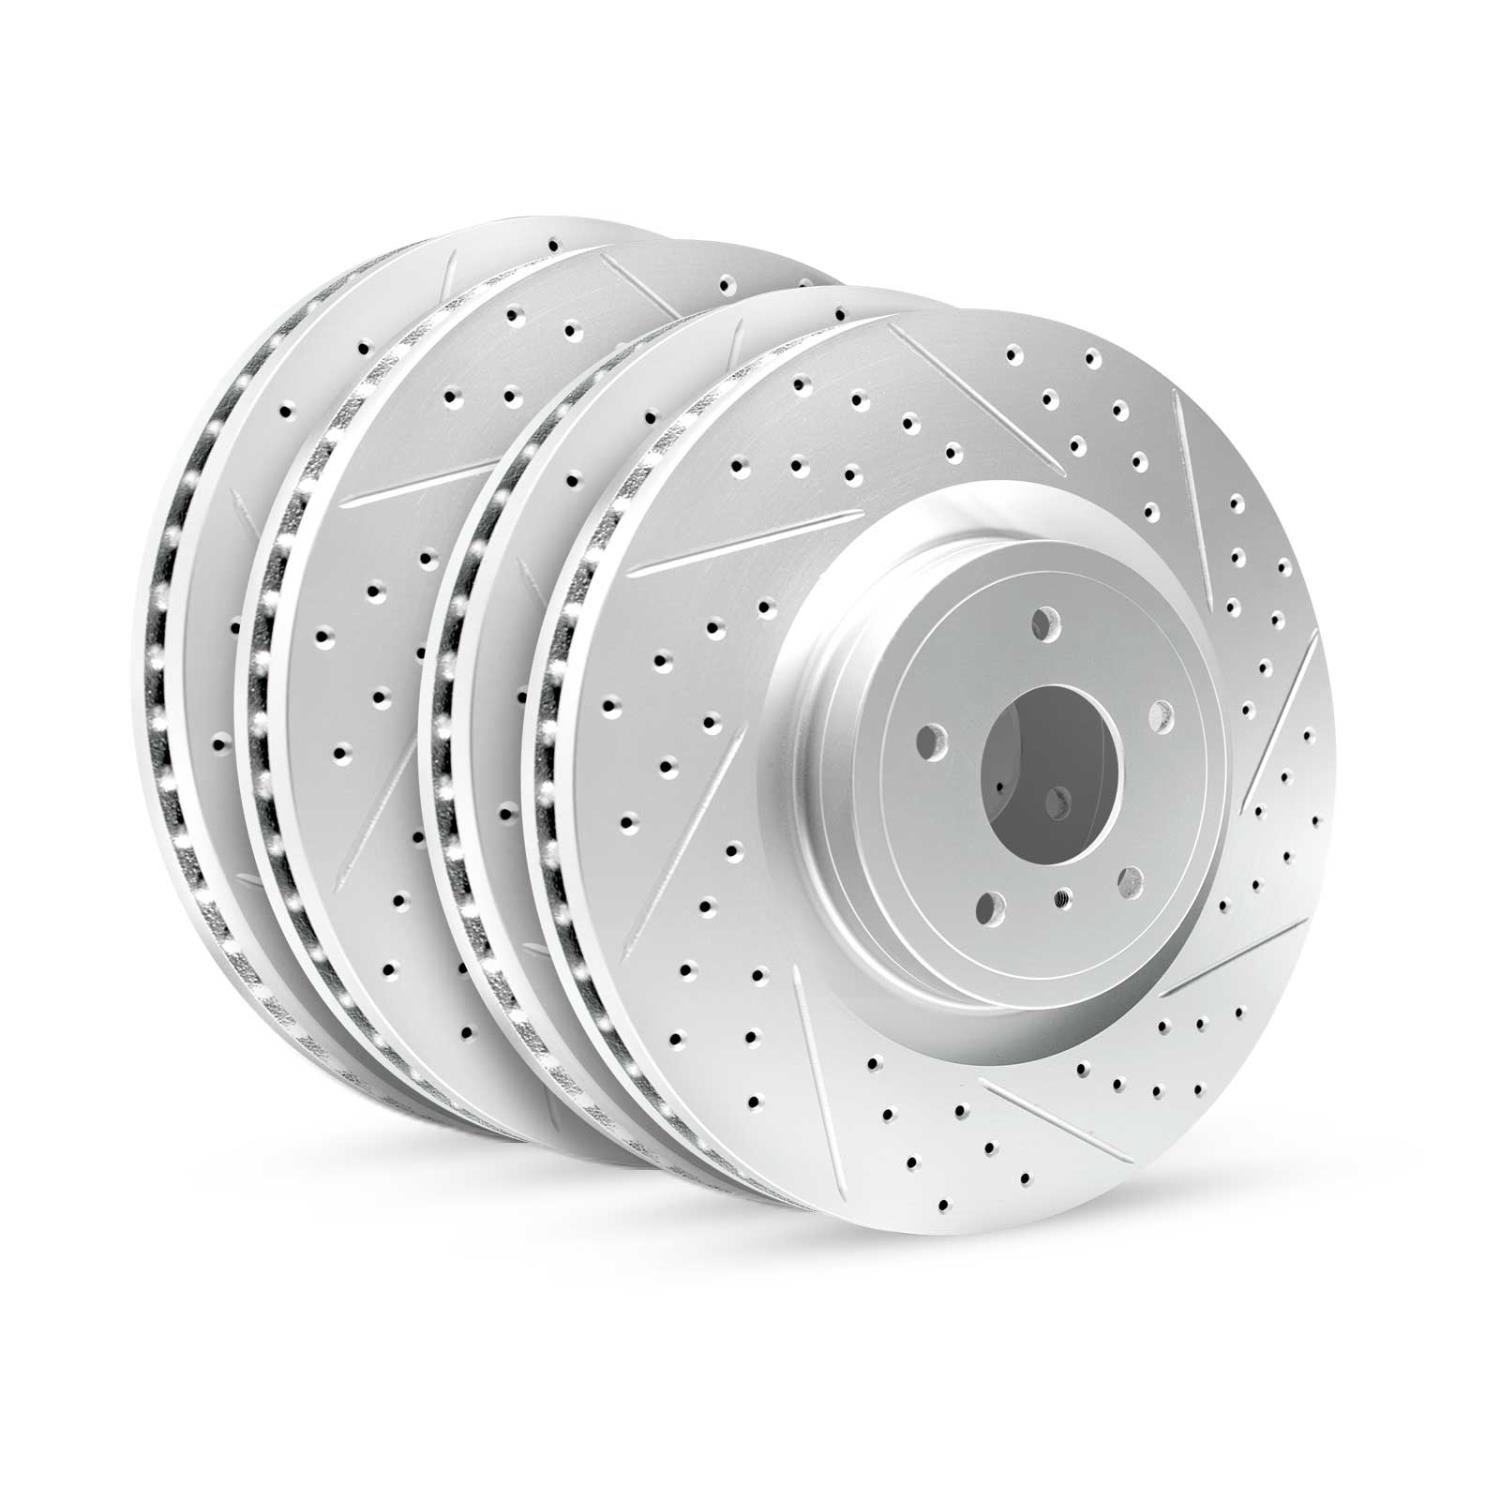 GEO-Carbon Drilled/Slotted Rotors, 2013-2018 Subaru, Position: Front/Rear